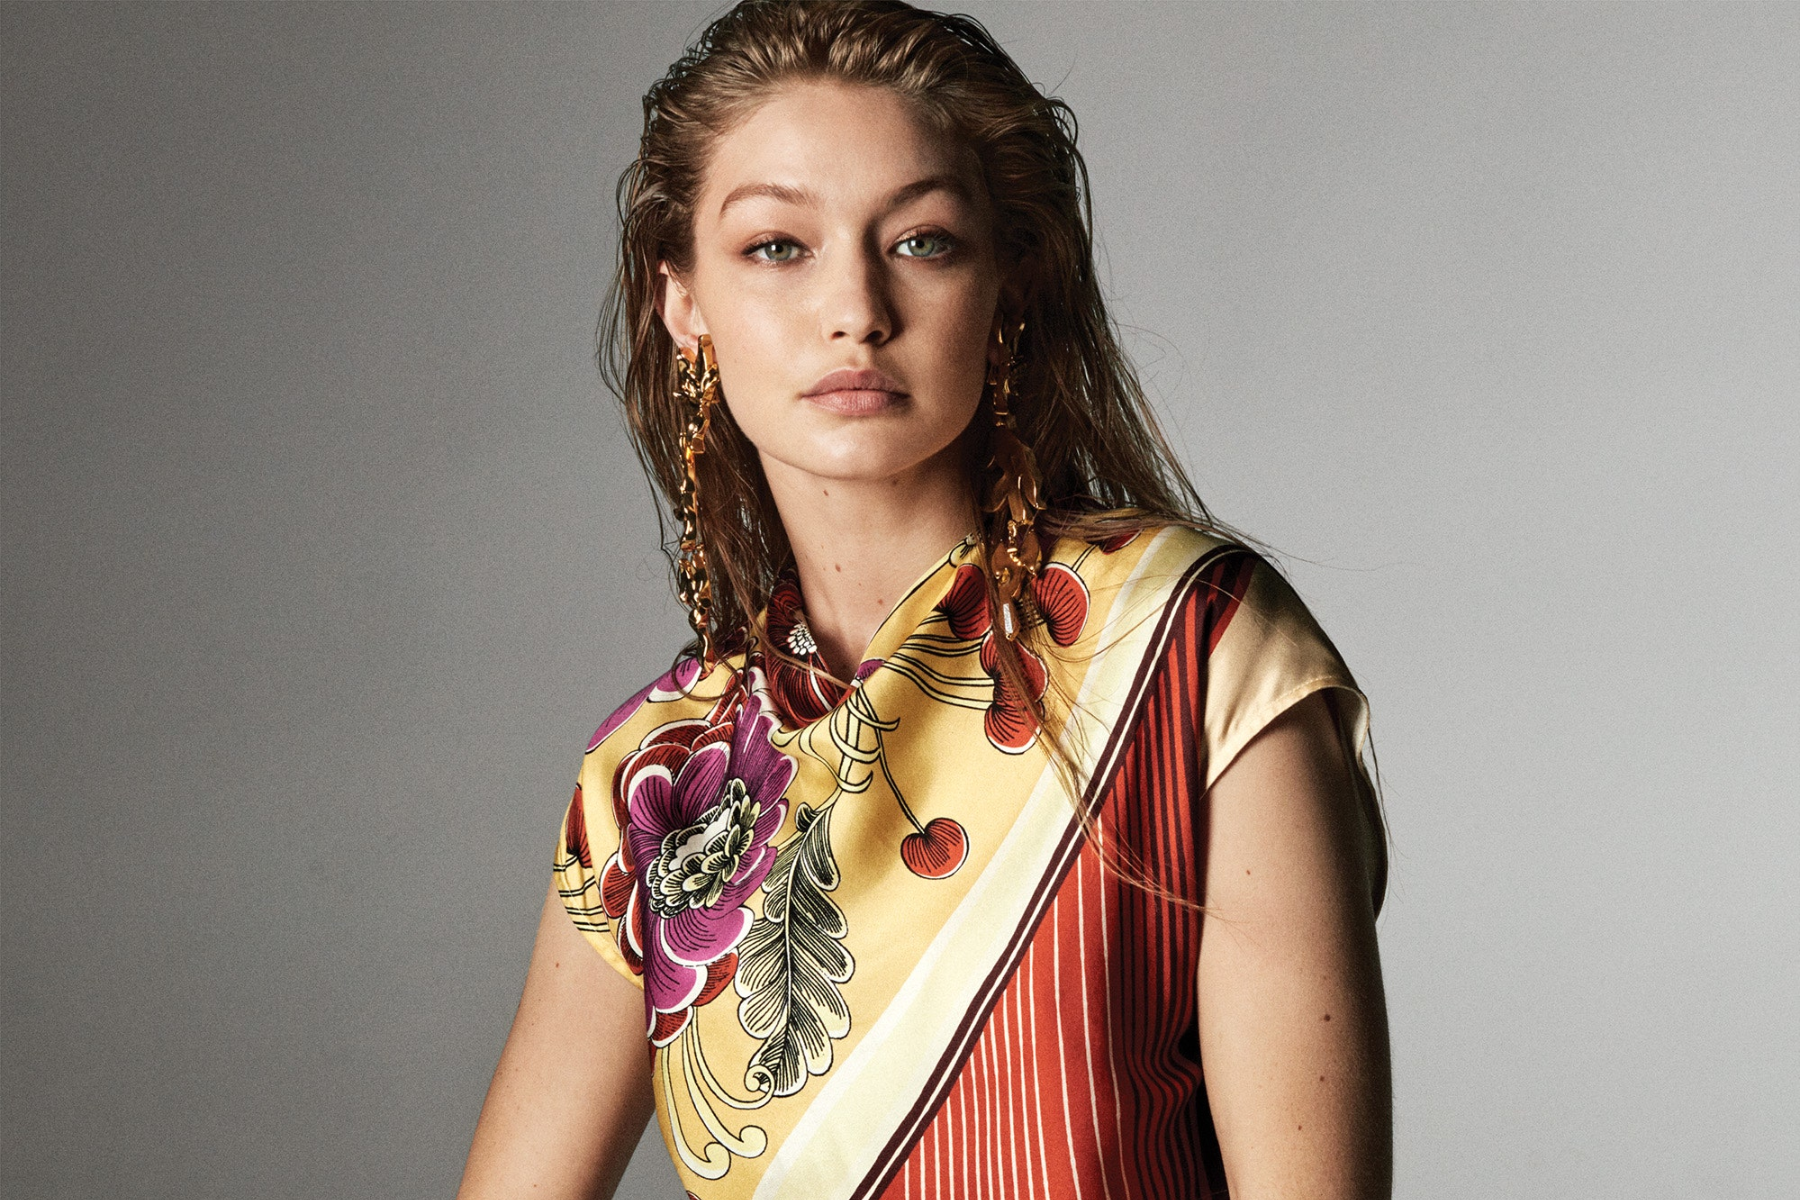 Gigi Hadid is wearing a set of sustainable earrings and a necklace